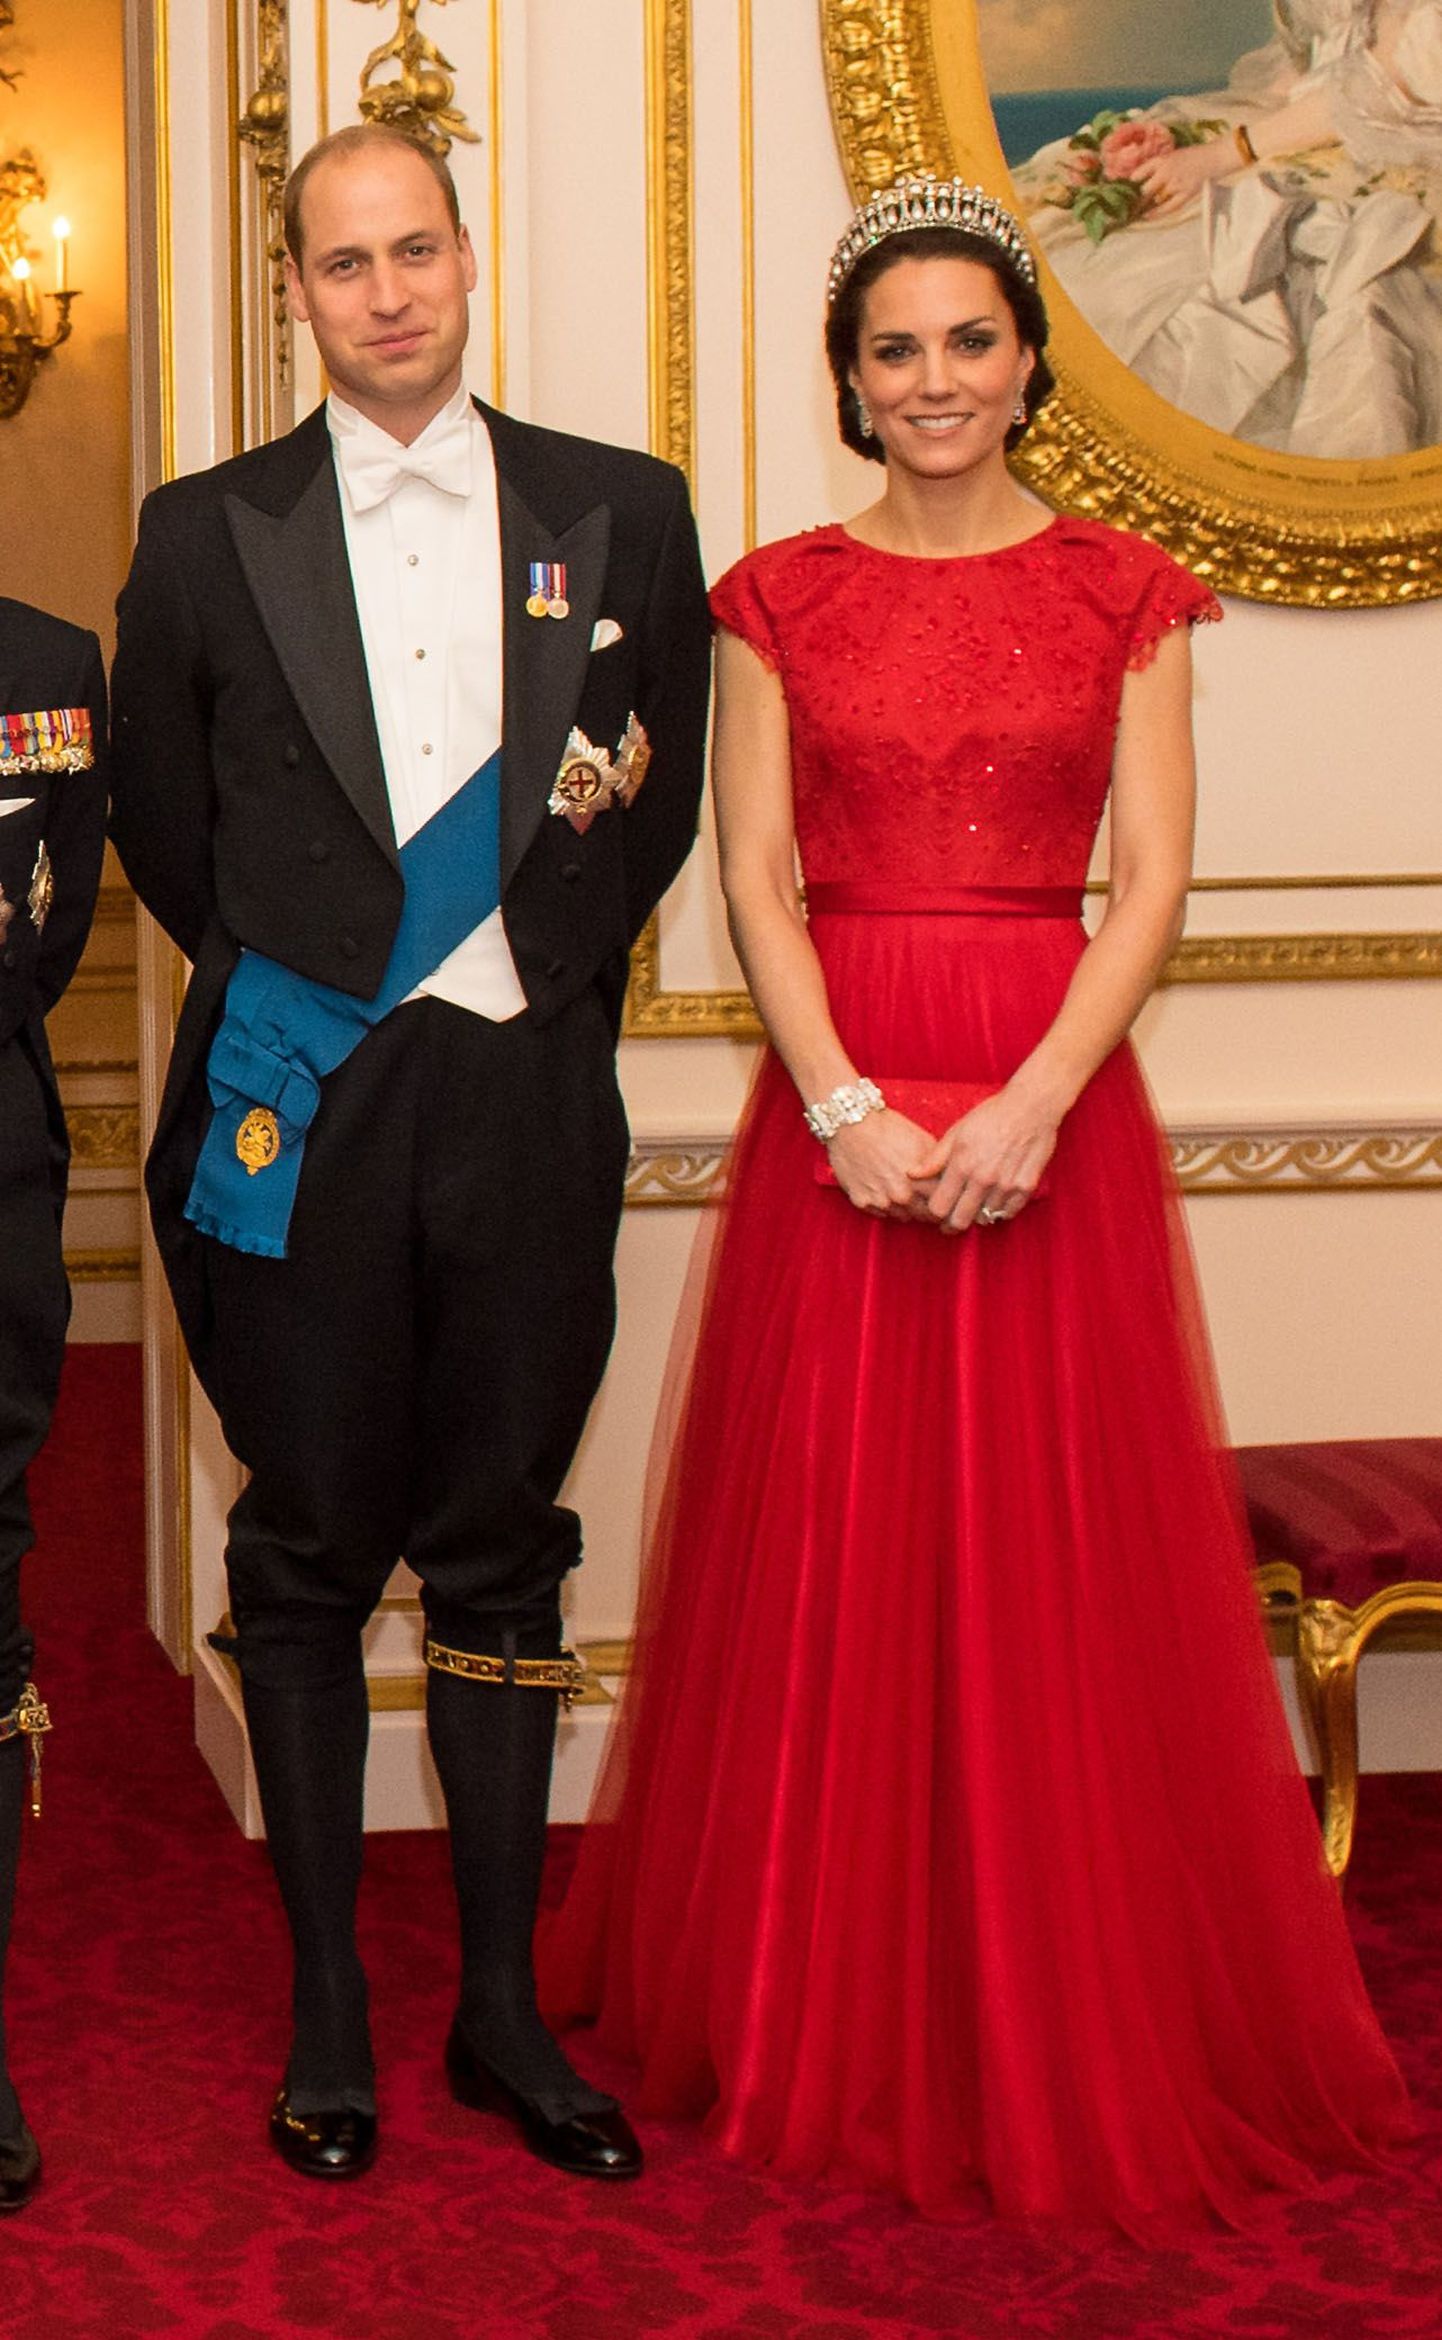 ALTERNATE CROP
The Duke and Duchess of Cambridge arrive for the annual evening reception for members of the Diplomatic Corps at Buckingham Palace, London.